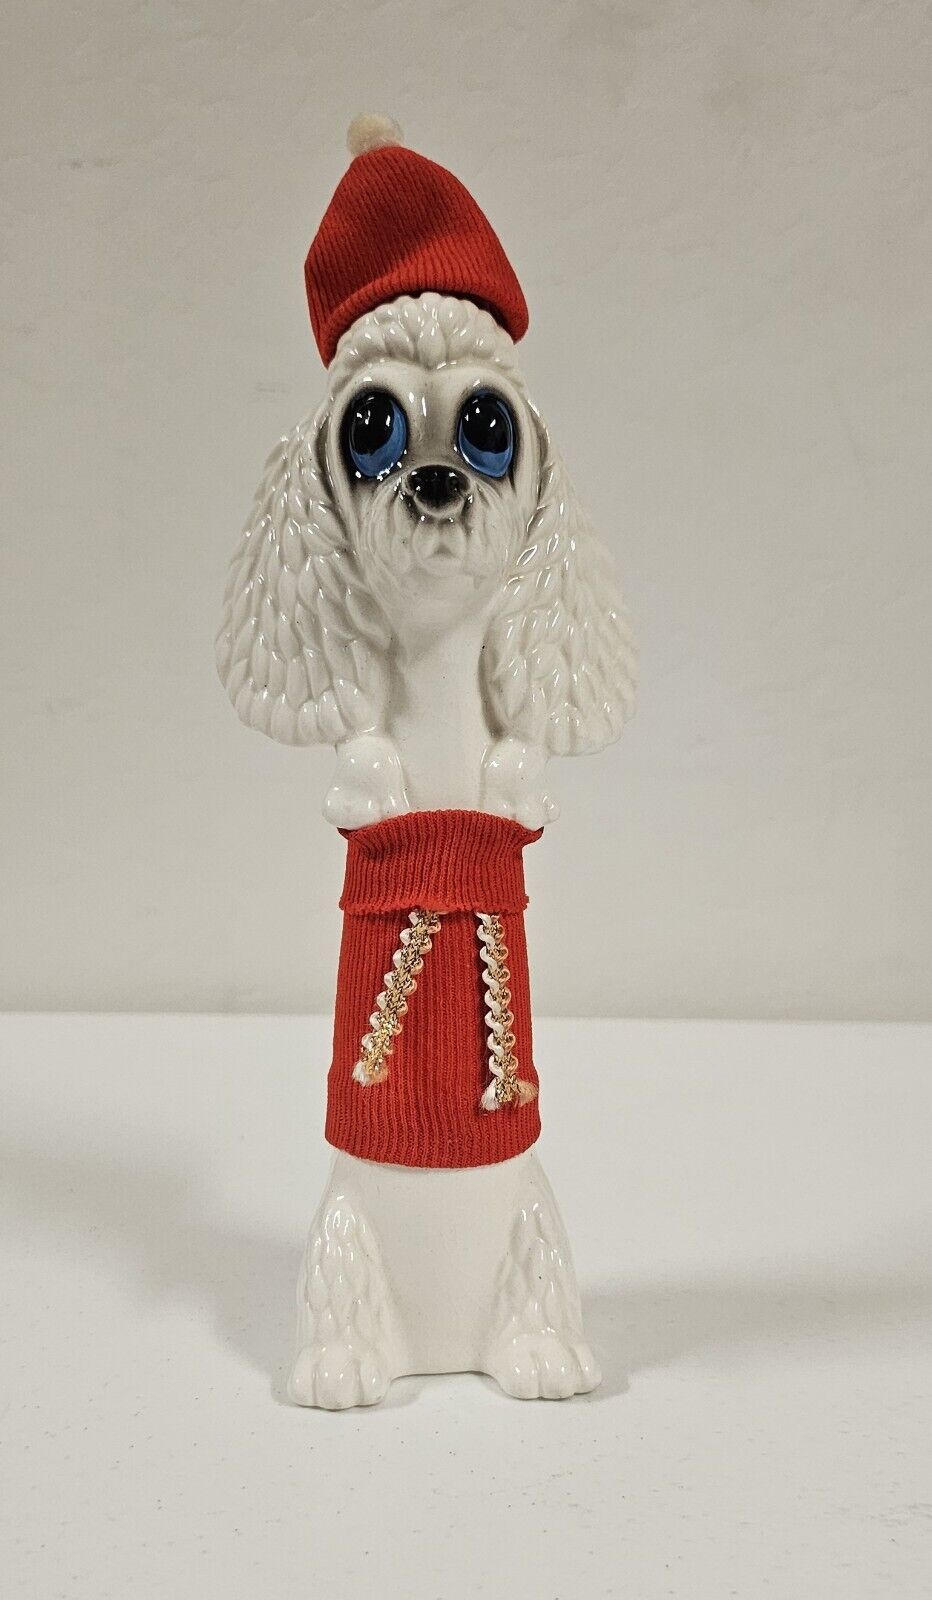 1950's Vintage Brinns Comical Poodle In Santa Outfit Figurine 9” Tall RARE